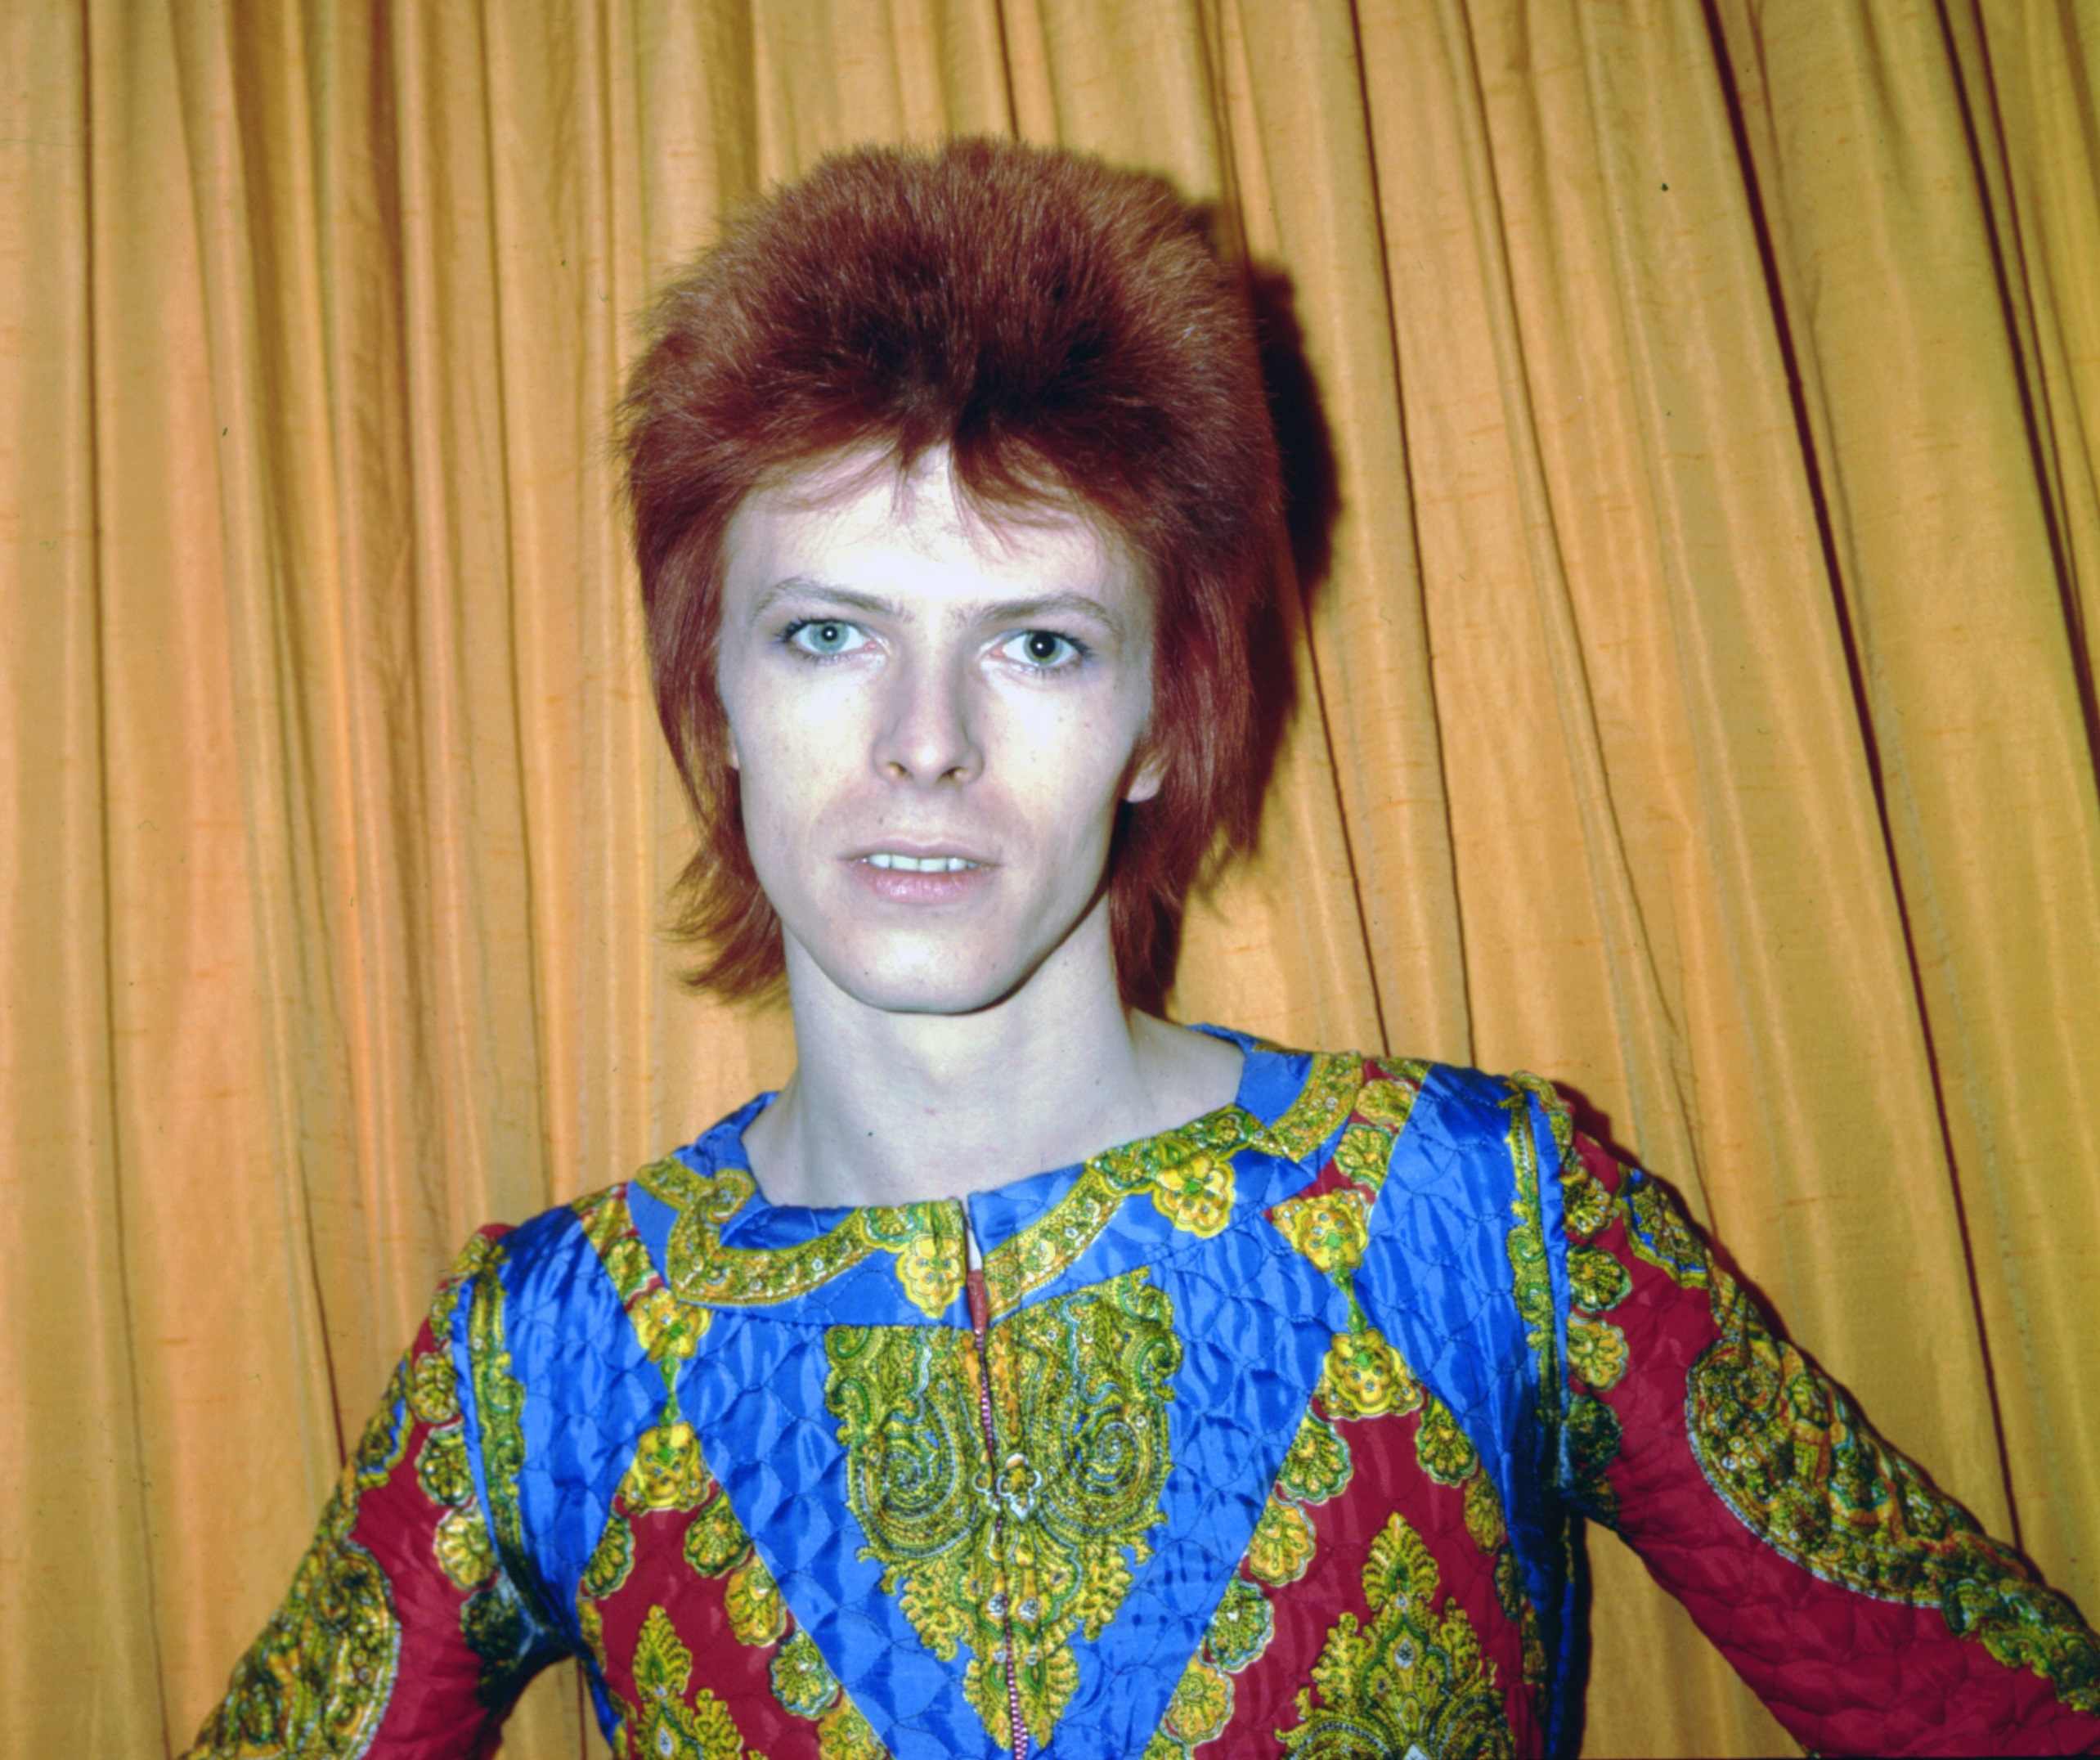 David Bowie as Ziggy Stardust in front of a curtain